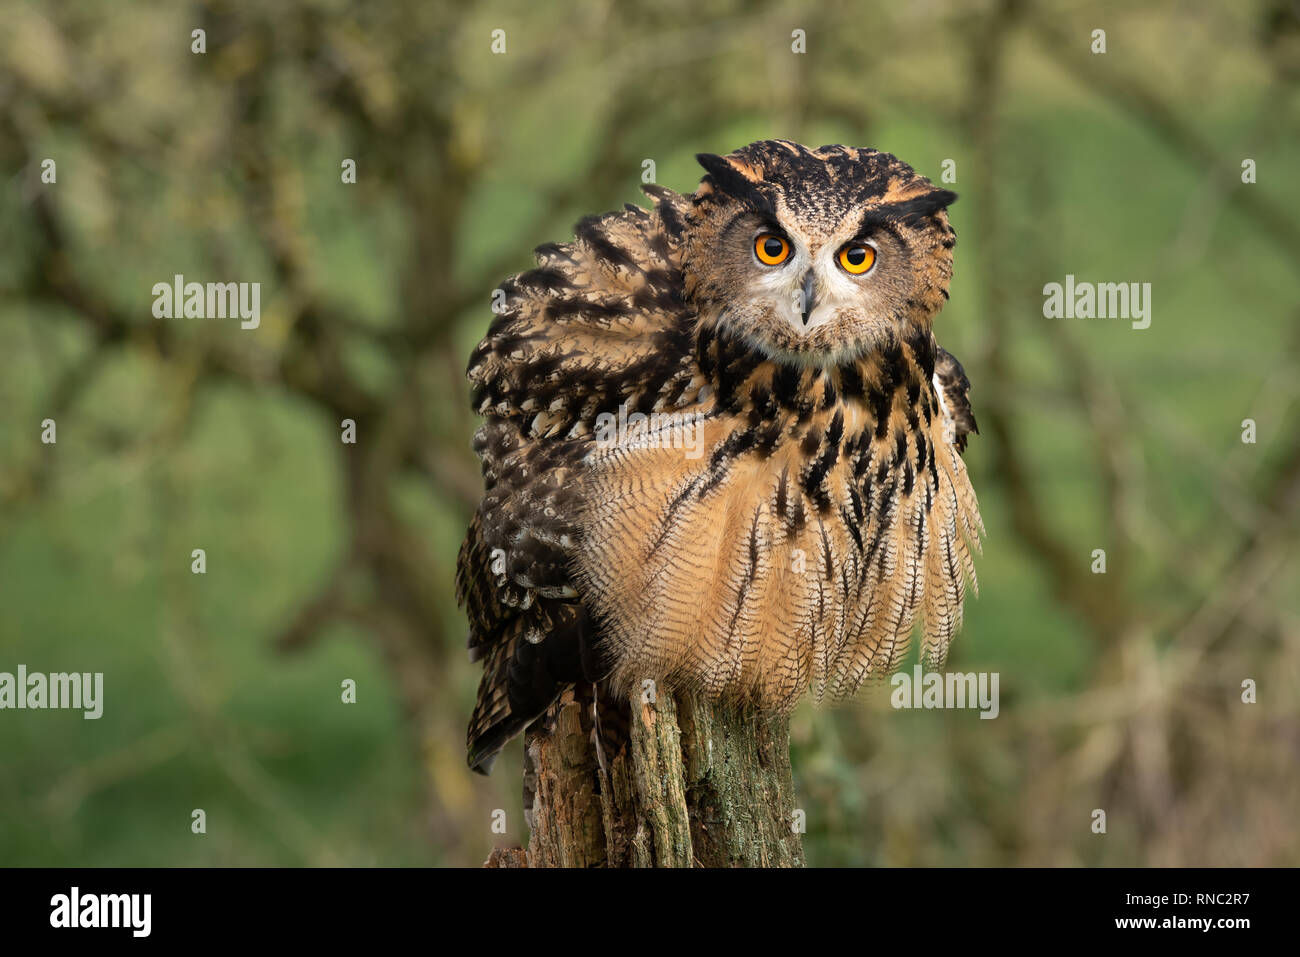 An eagle owls feeling threatened so it fluffs or ruffles its feathers and is facing forward Stock Photo